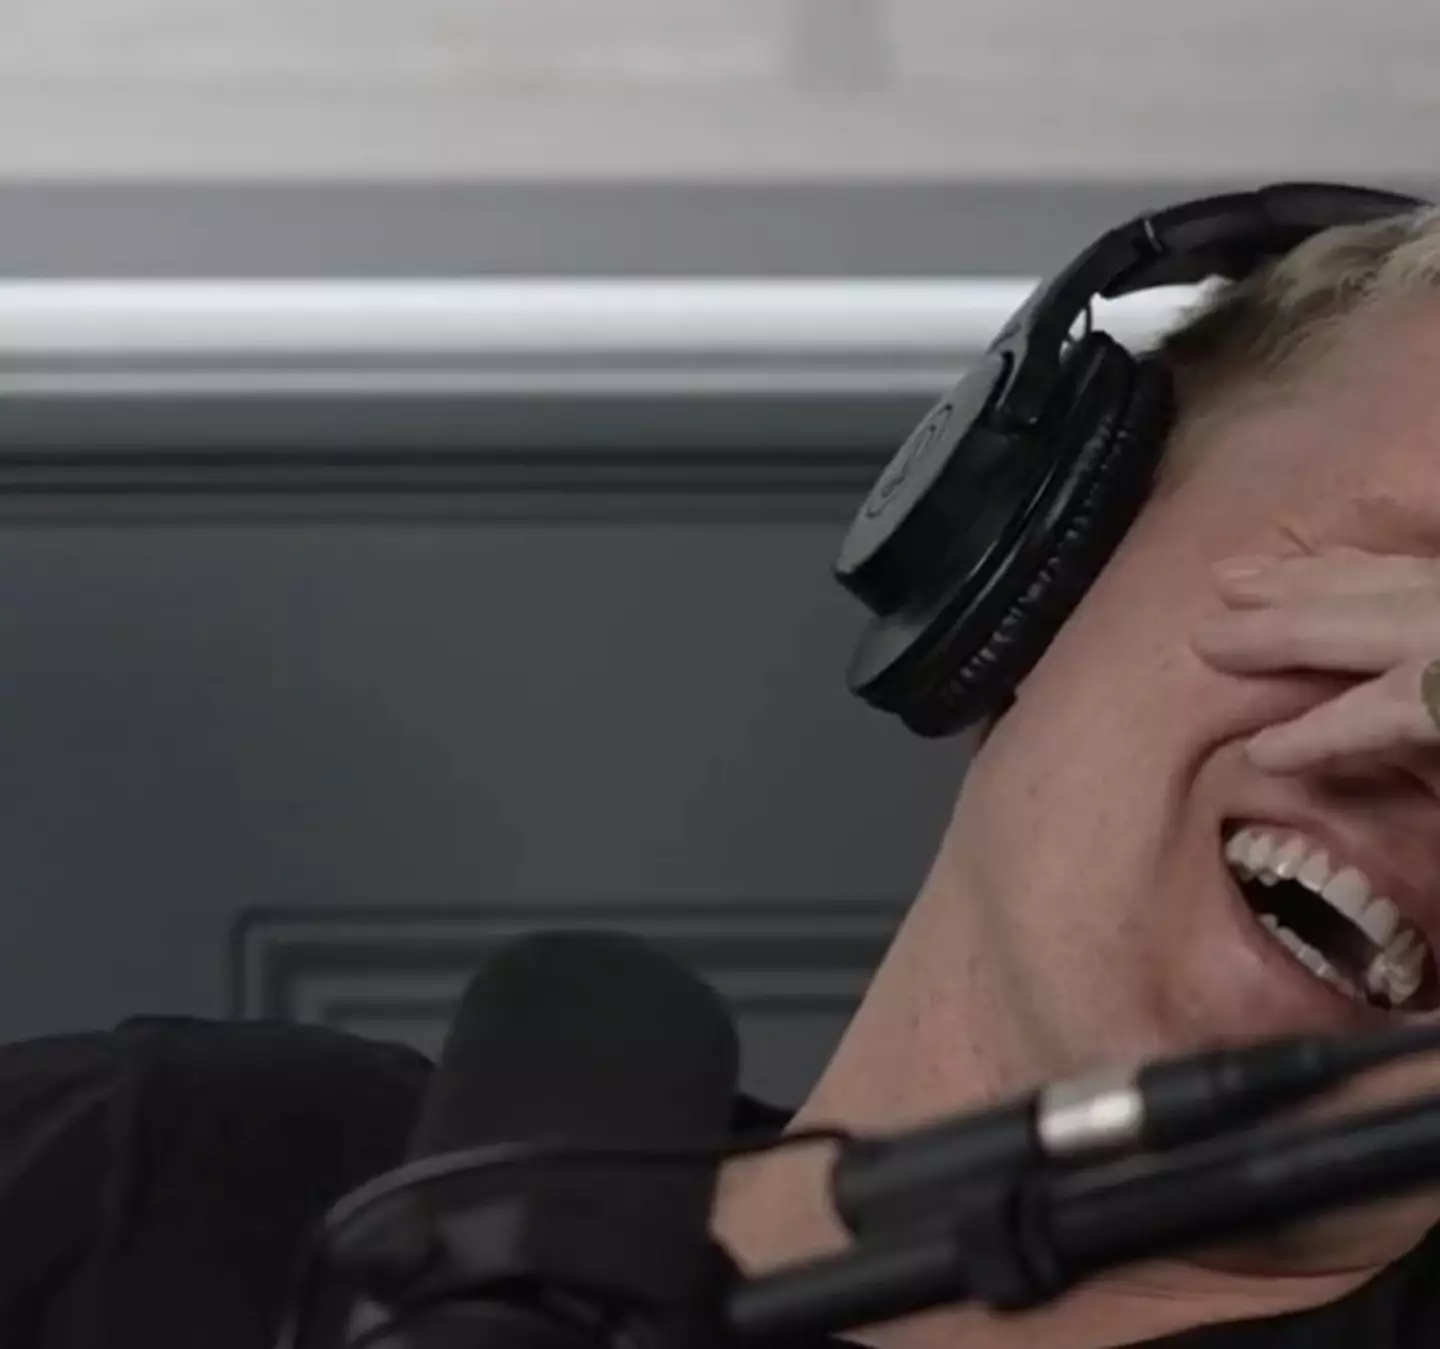 Jamie Laing couldn't control his laughter at the story.